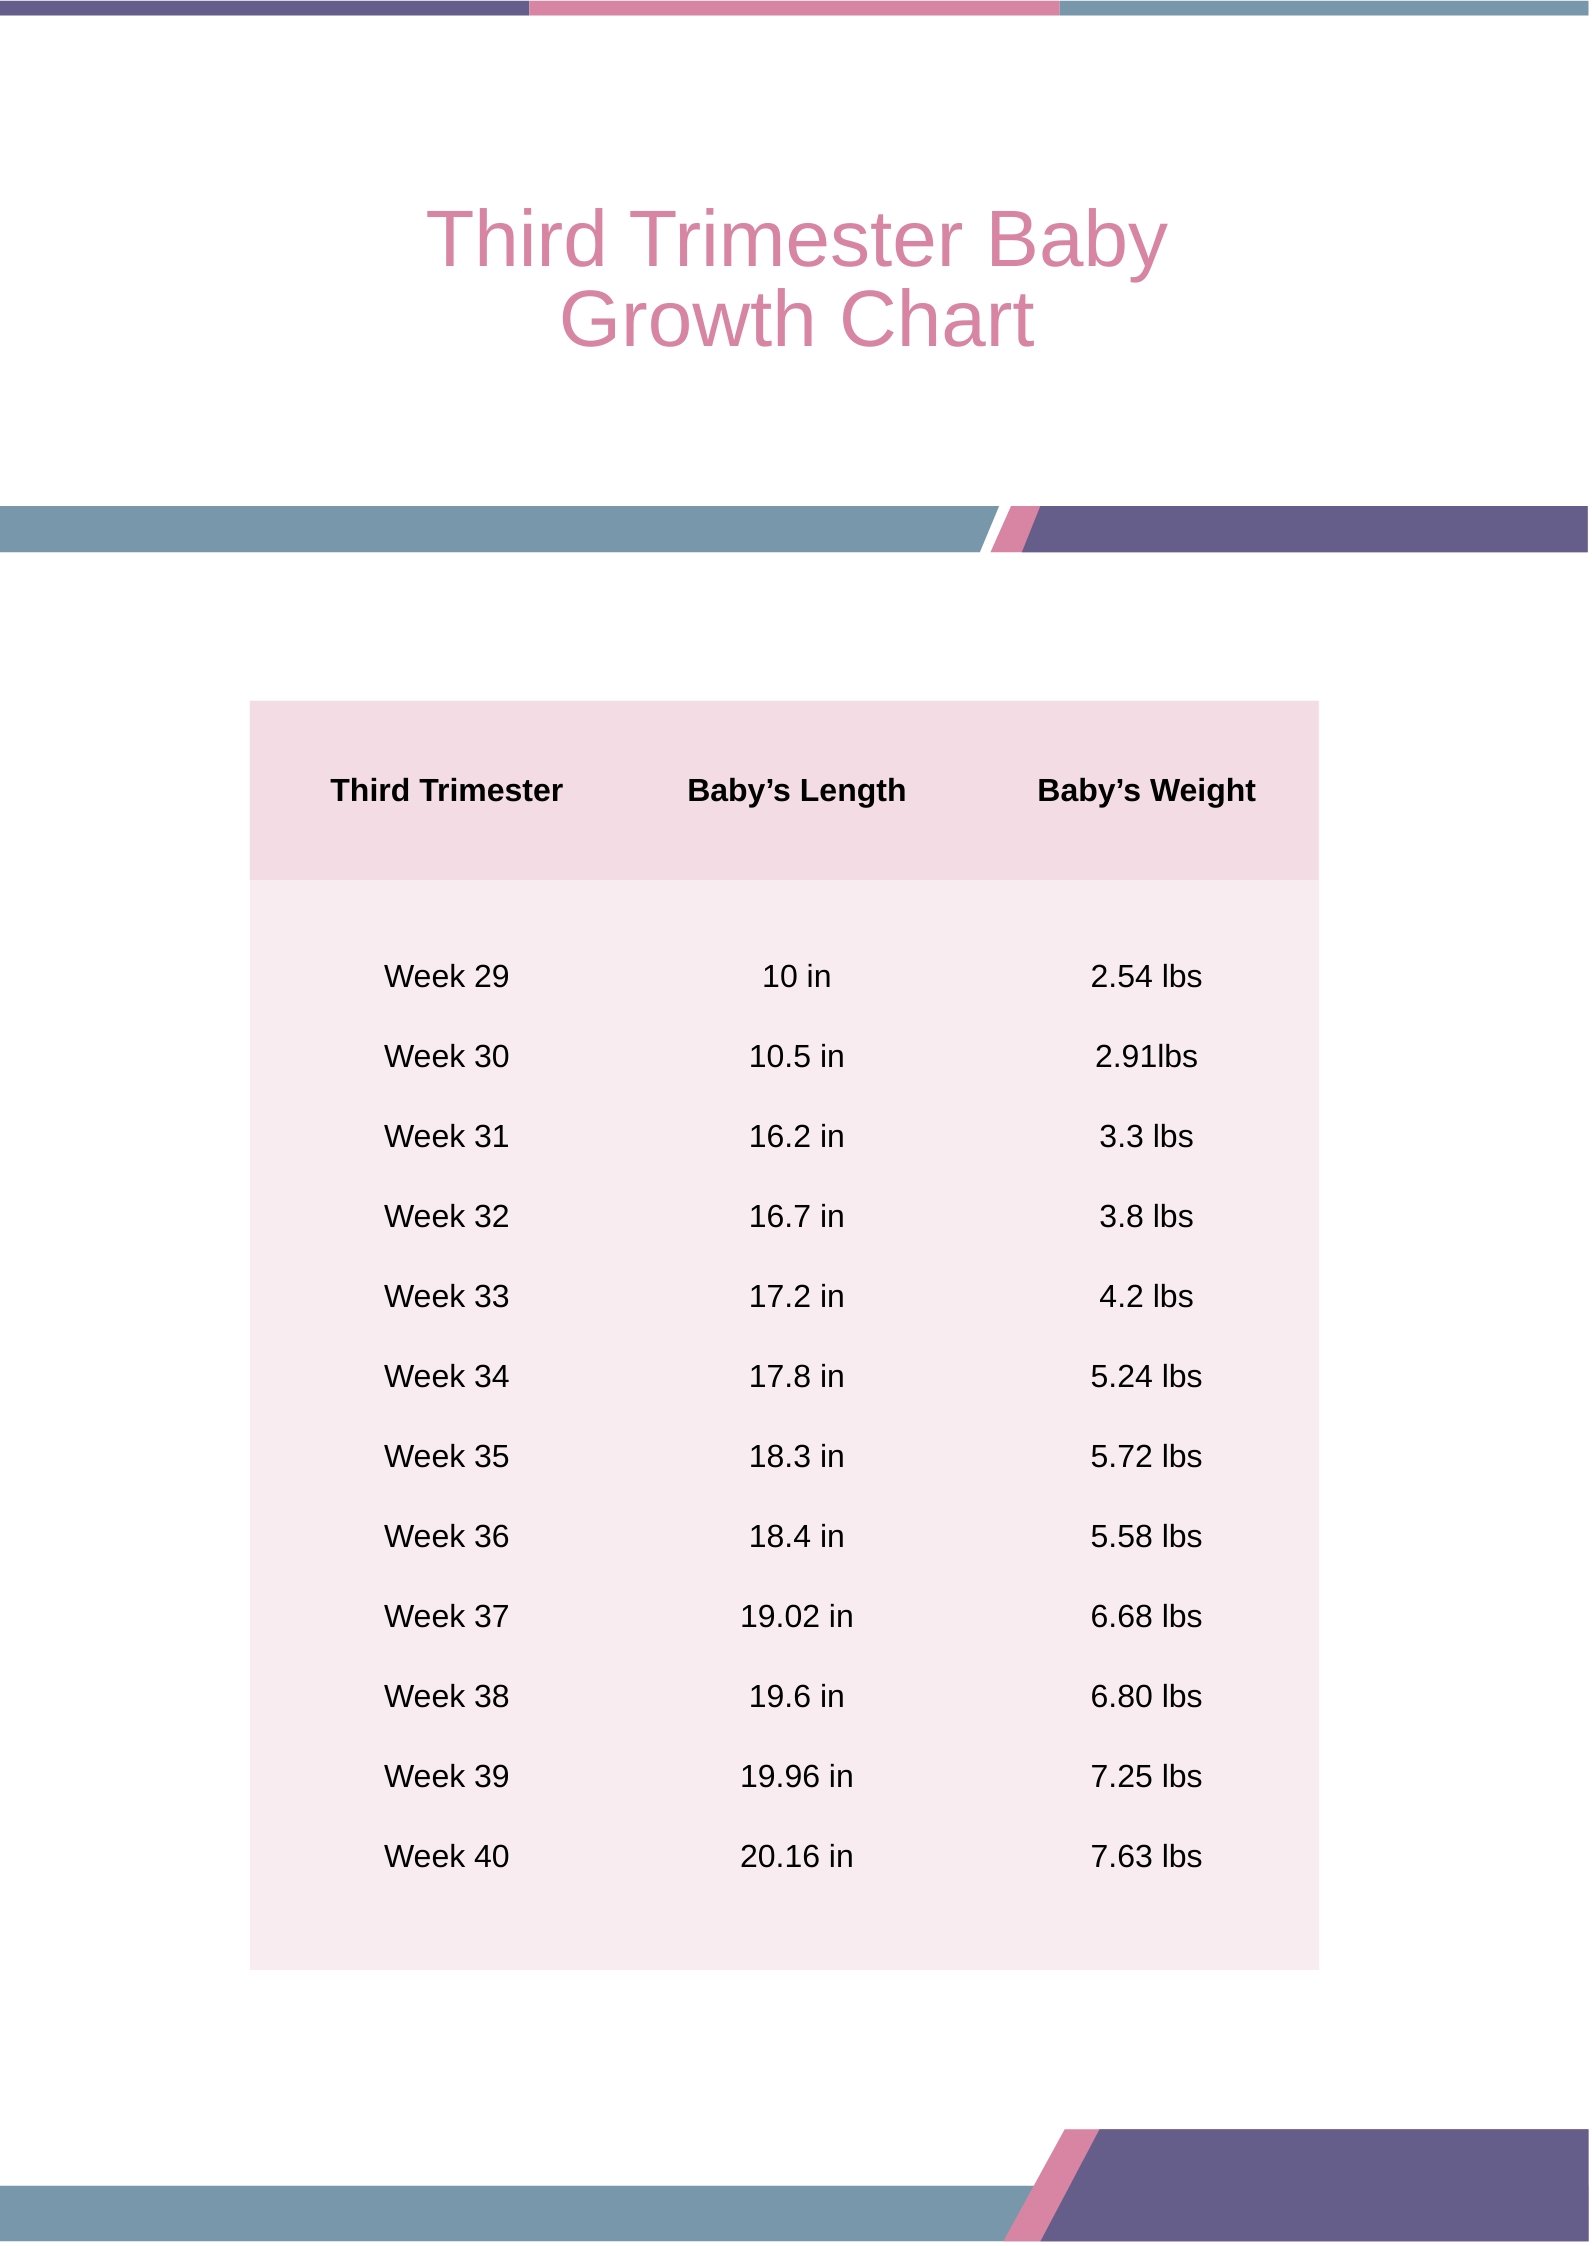 Third Trimester Baby Growth Chart